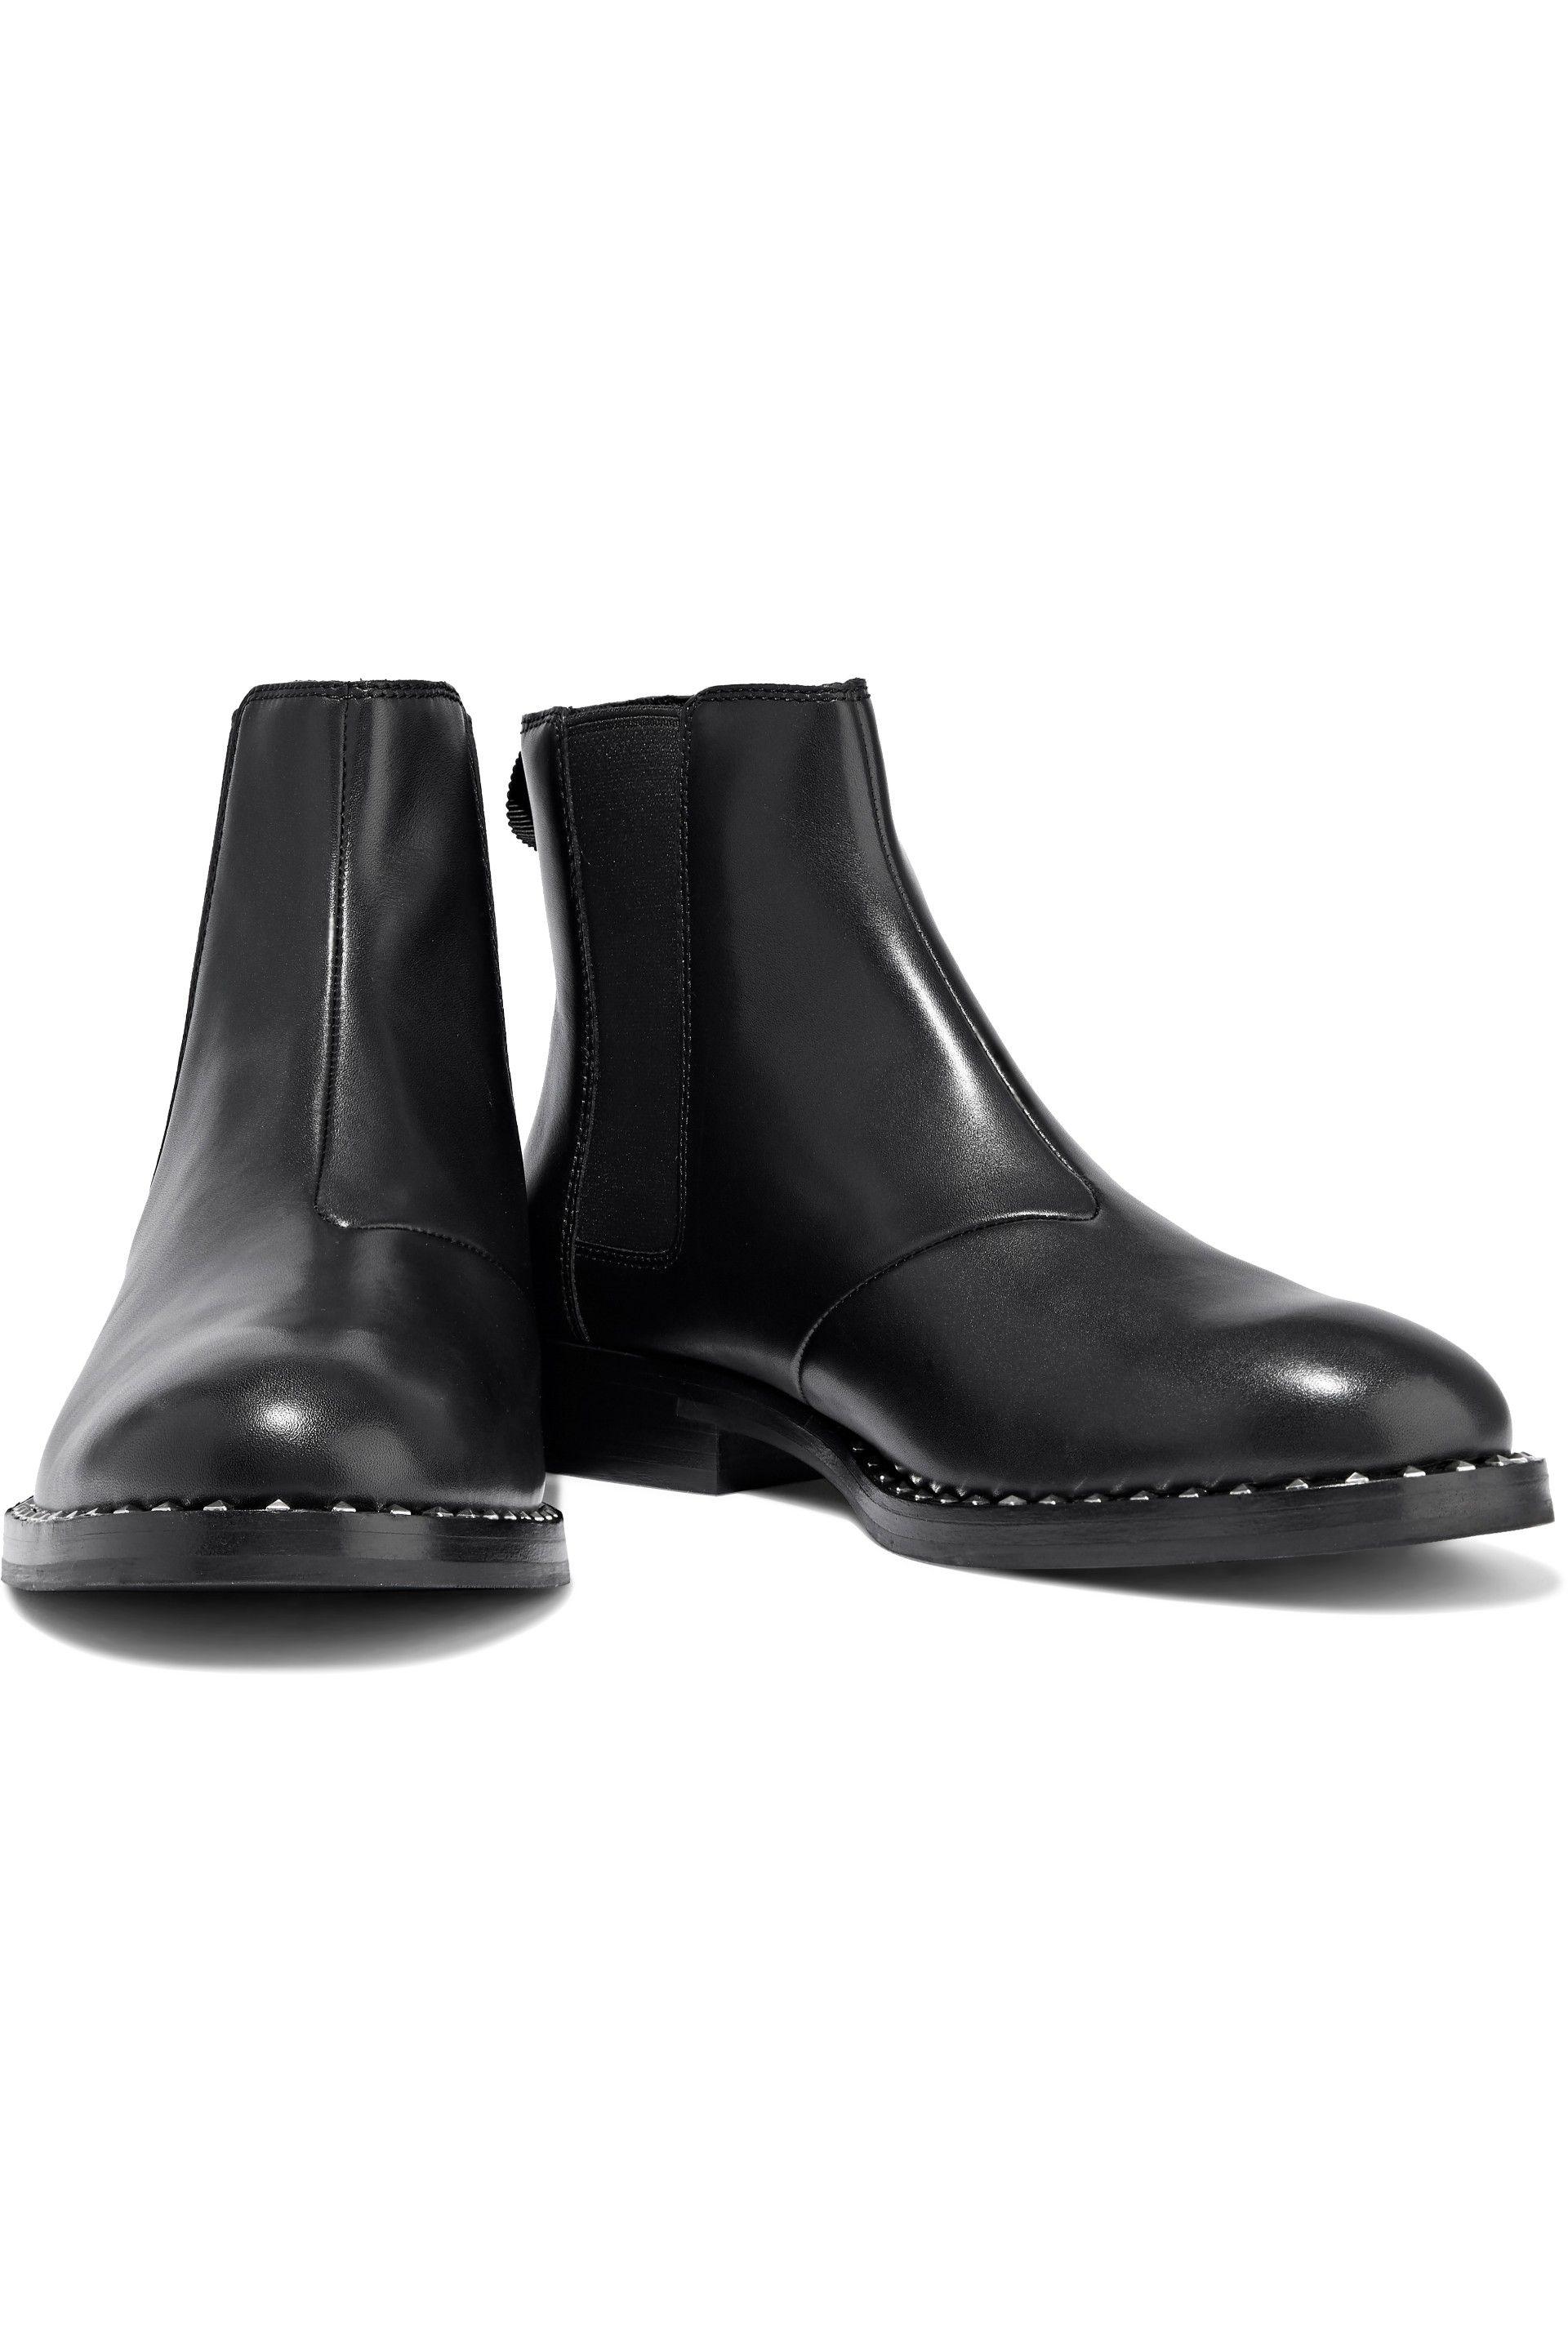 ash wino studded leather chelsea boots